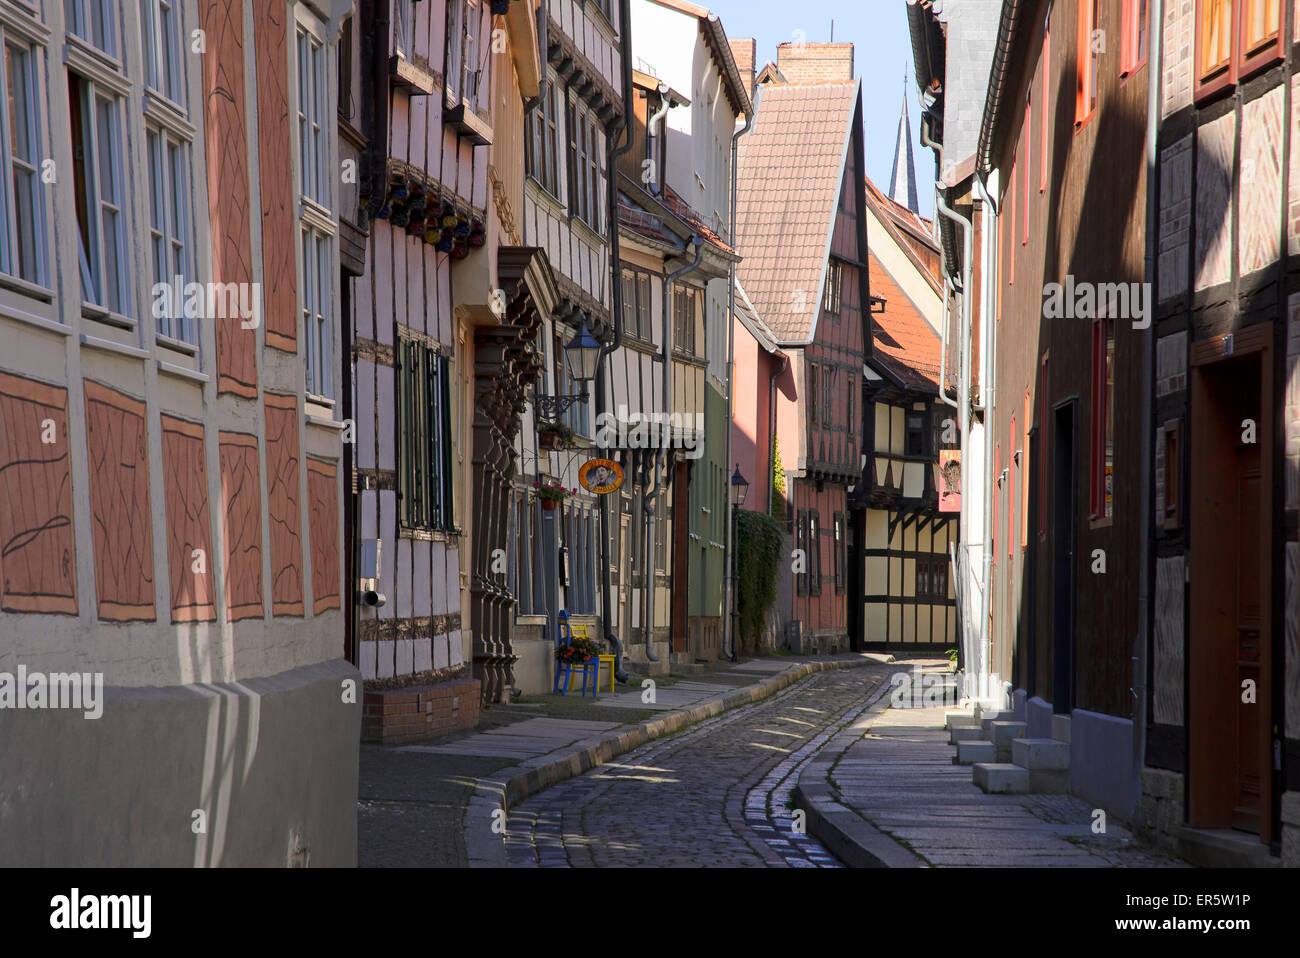 Half-timbered houses in an alley in the historic town of Quedlinburg, Harz, Saxony-Anhalt, Germany, Europe Stock Photo